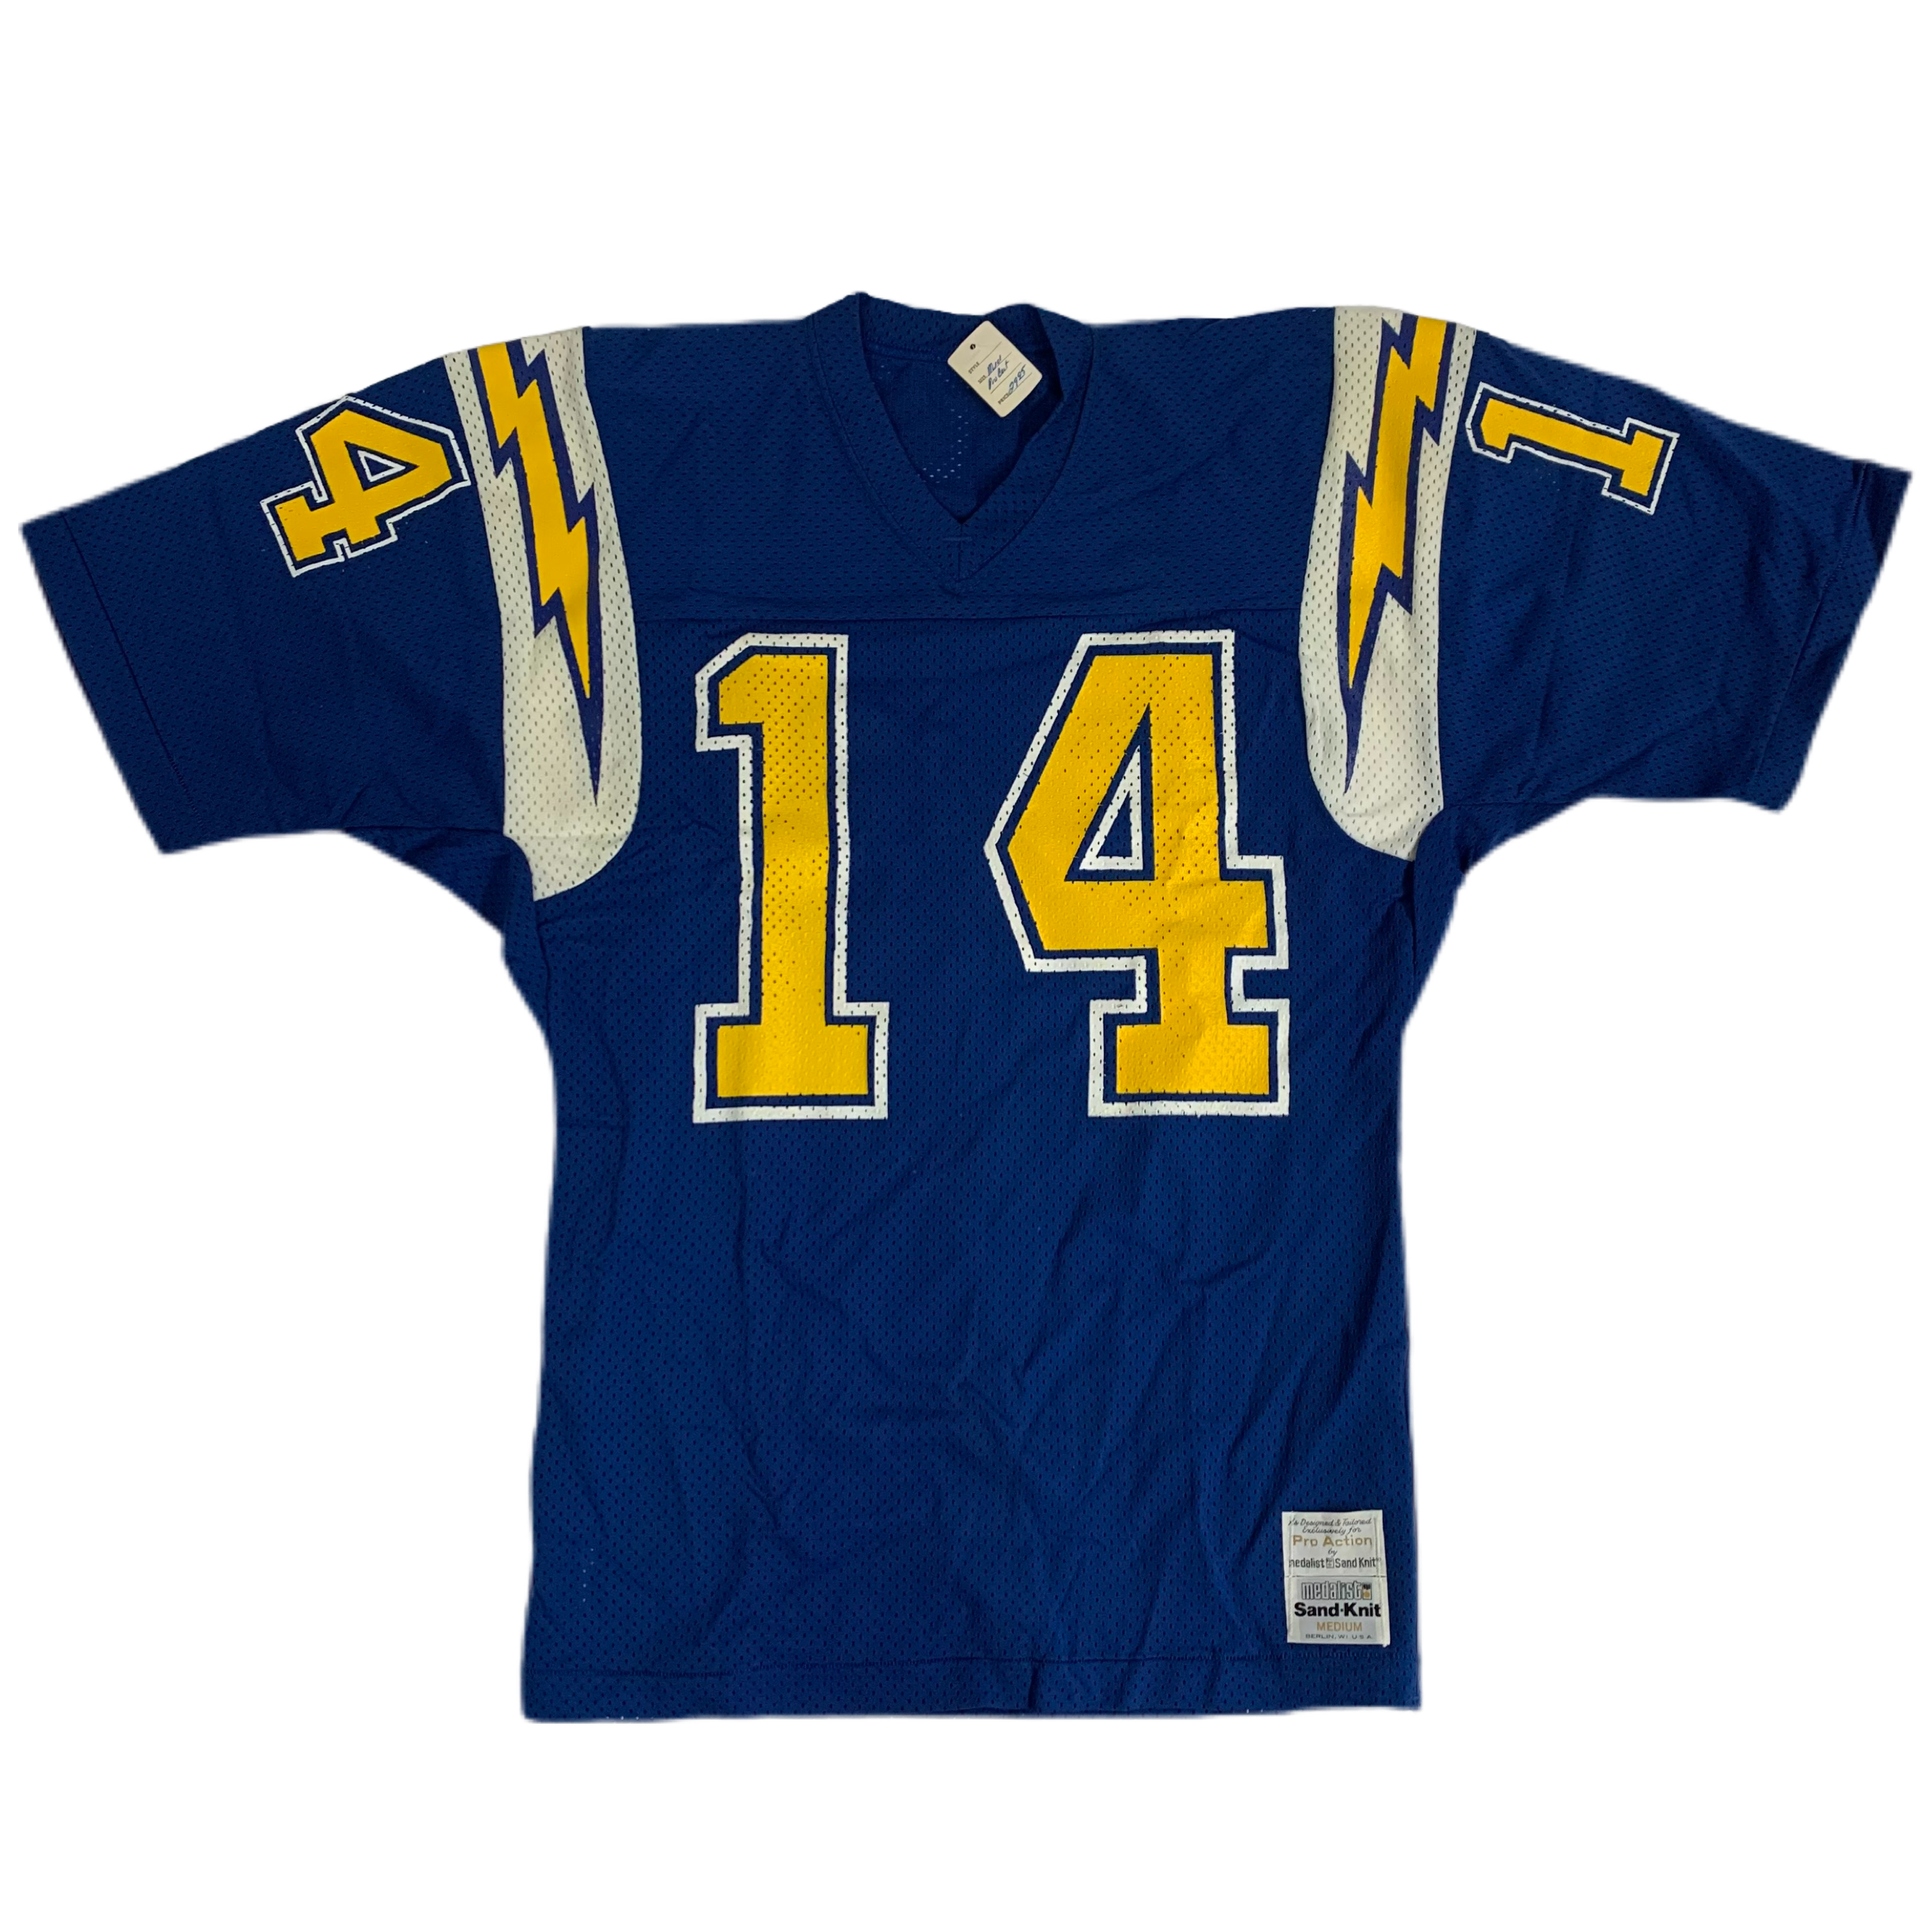 San Diego Chargers Throwback Apparel & Jerseys